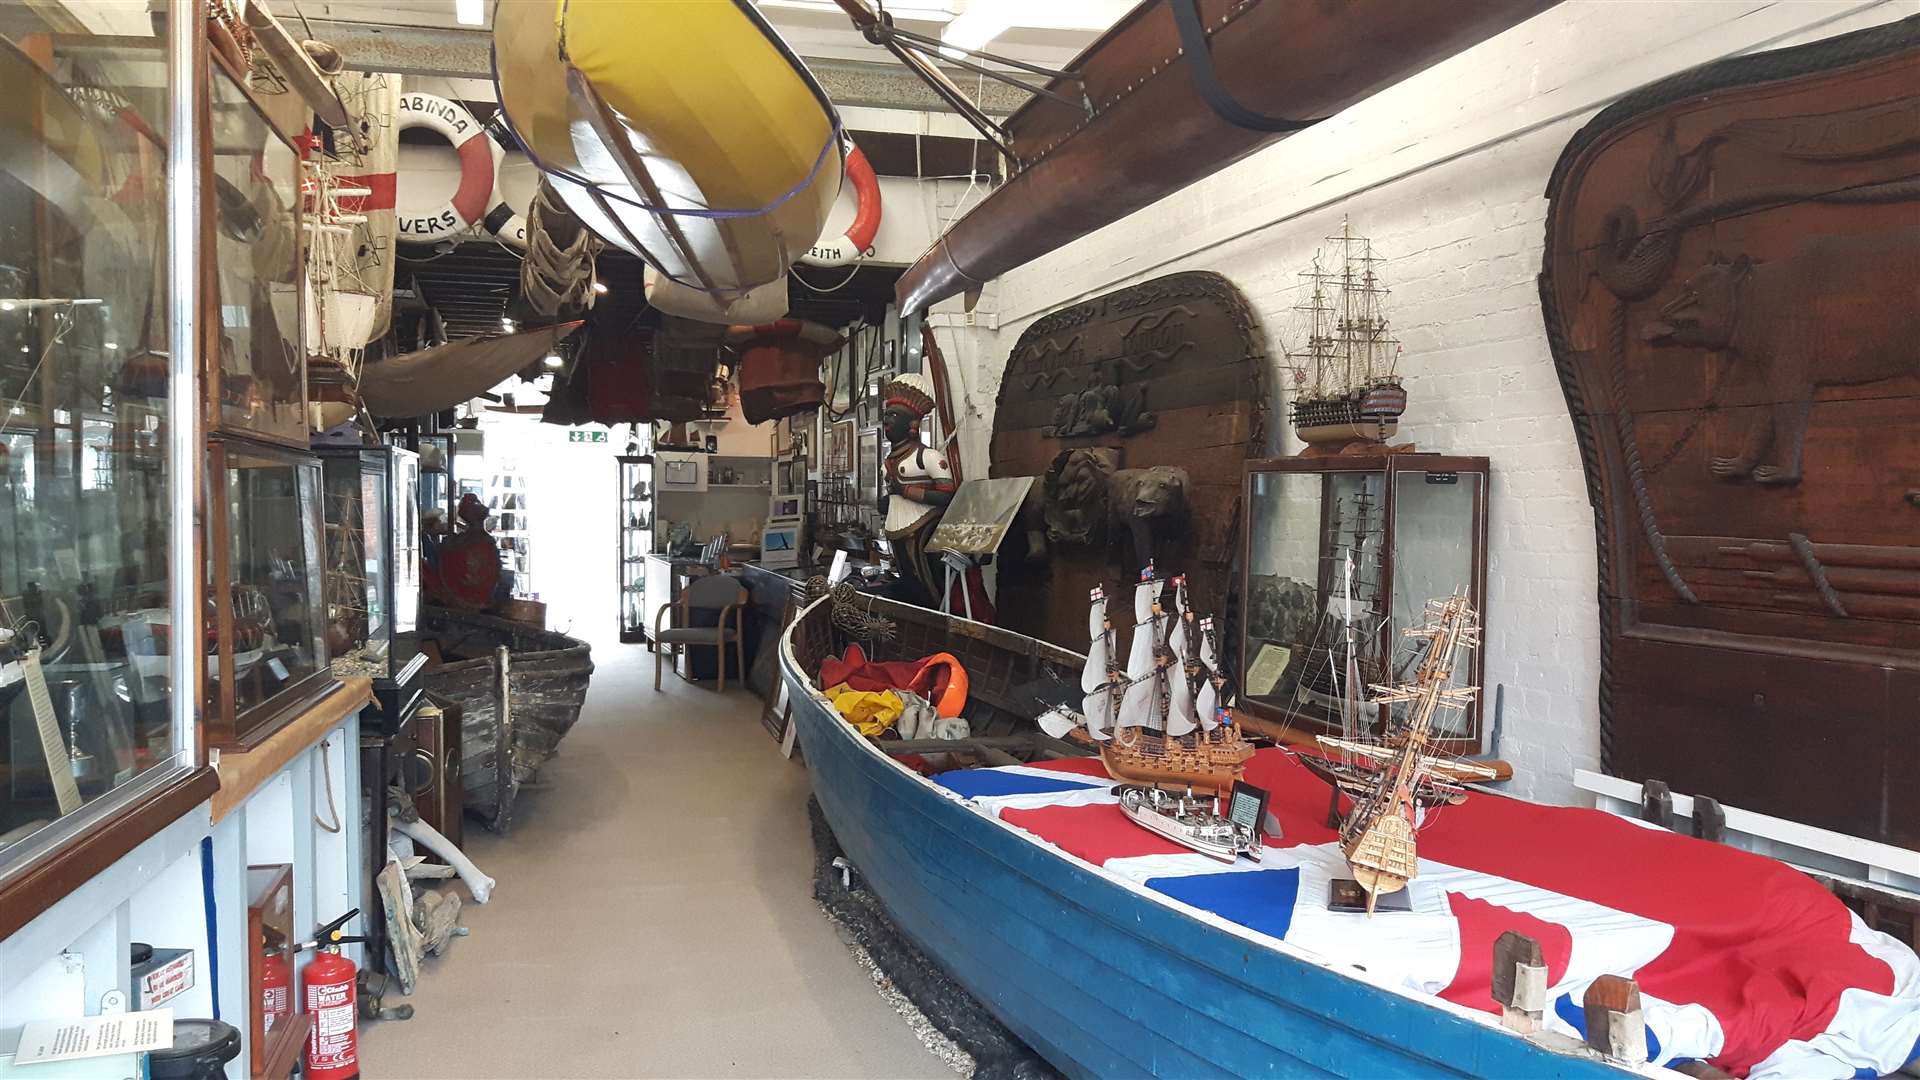 Deal Maritime and Local History Museum has reopened its doors for visitors